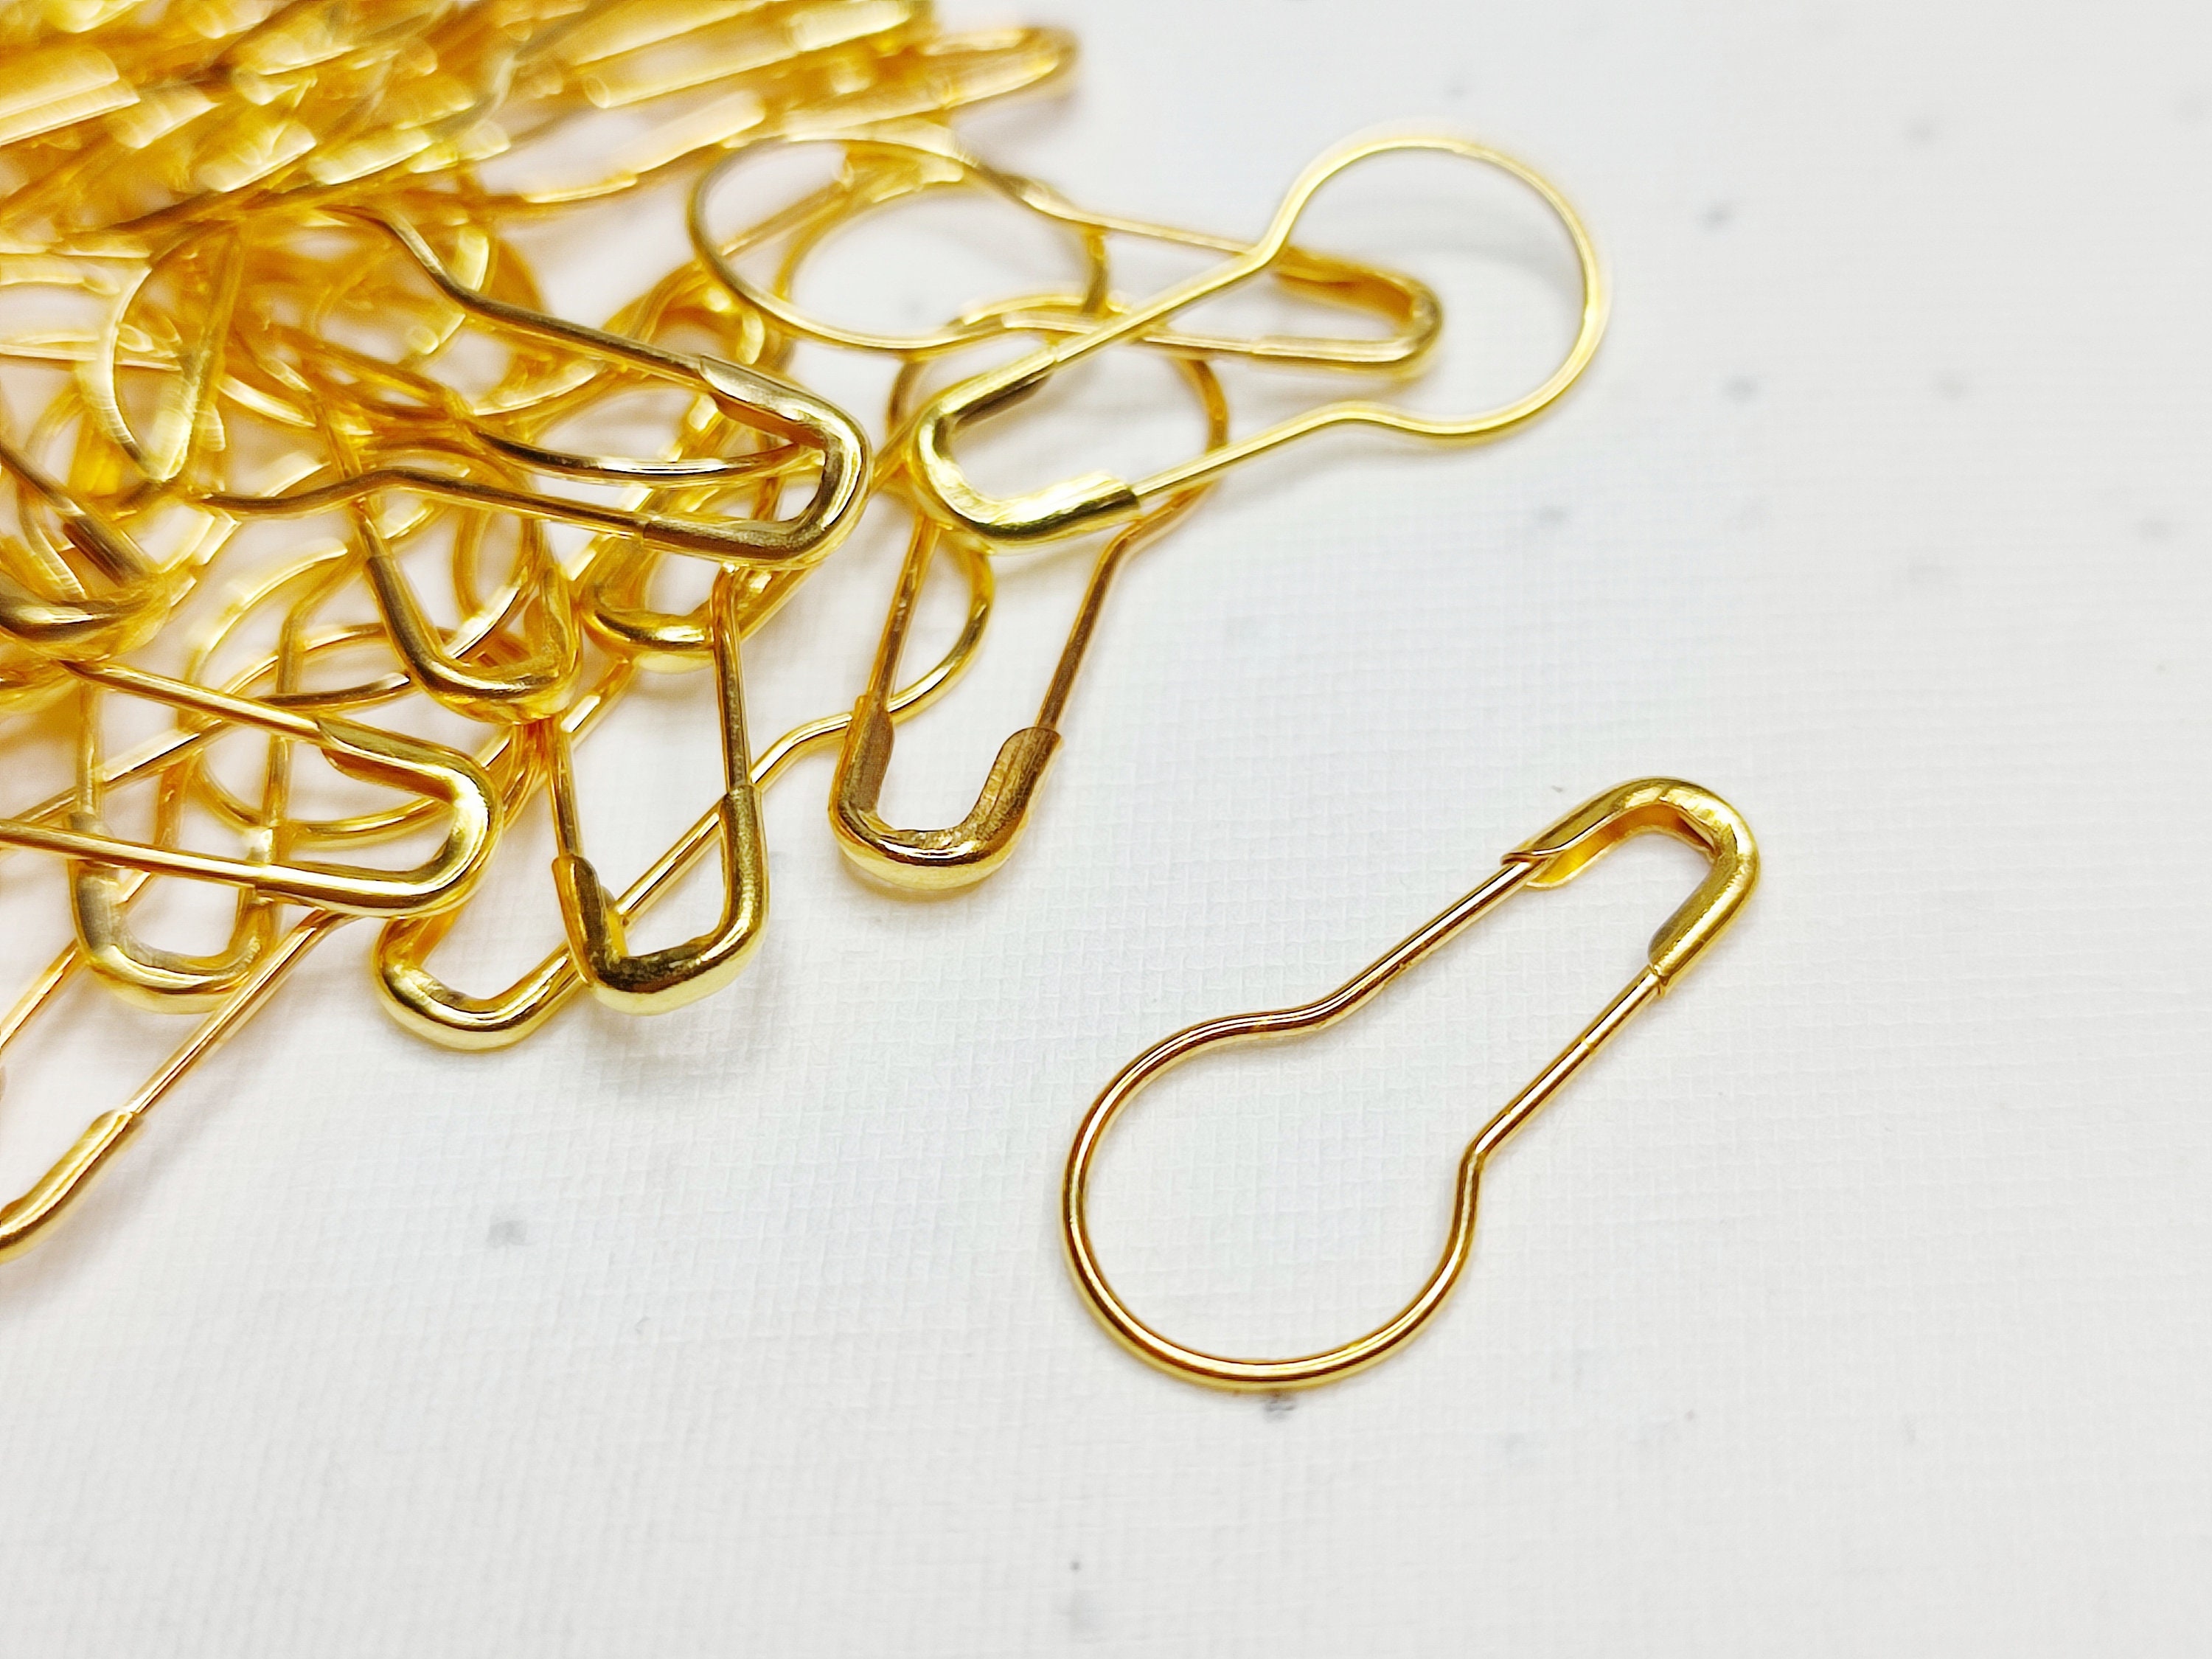 Extra Large Bronze Strong Heavy Duty Safety Pins Craft Jewelry Laundry  Sewing Aids 